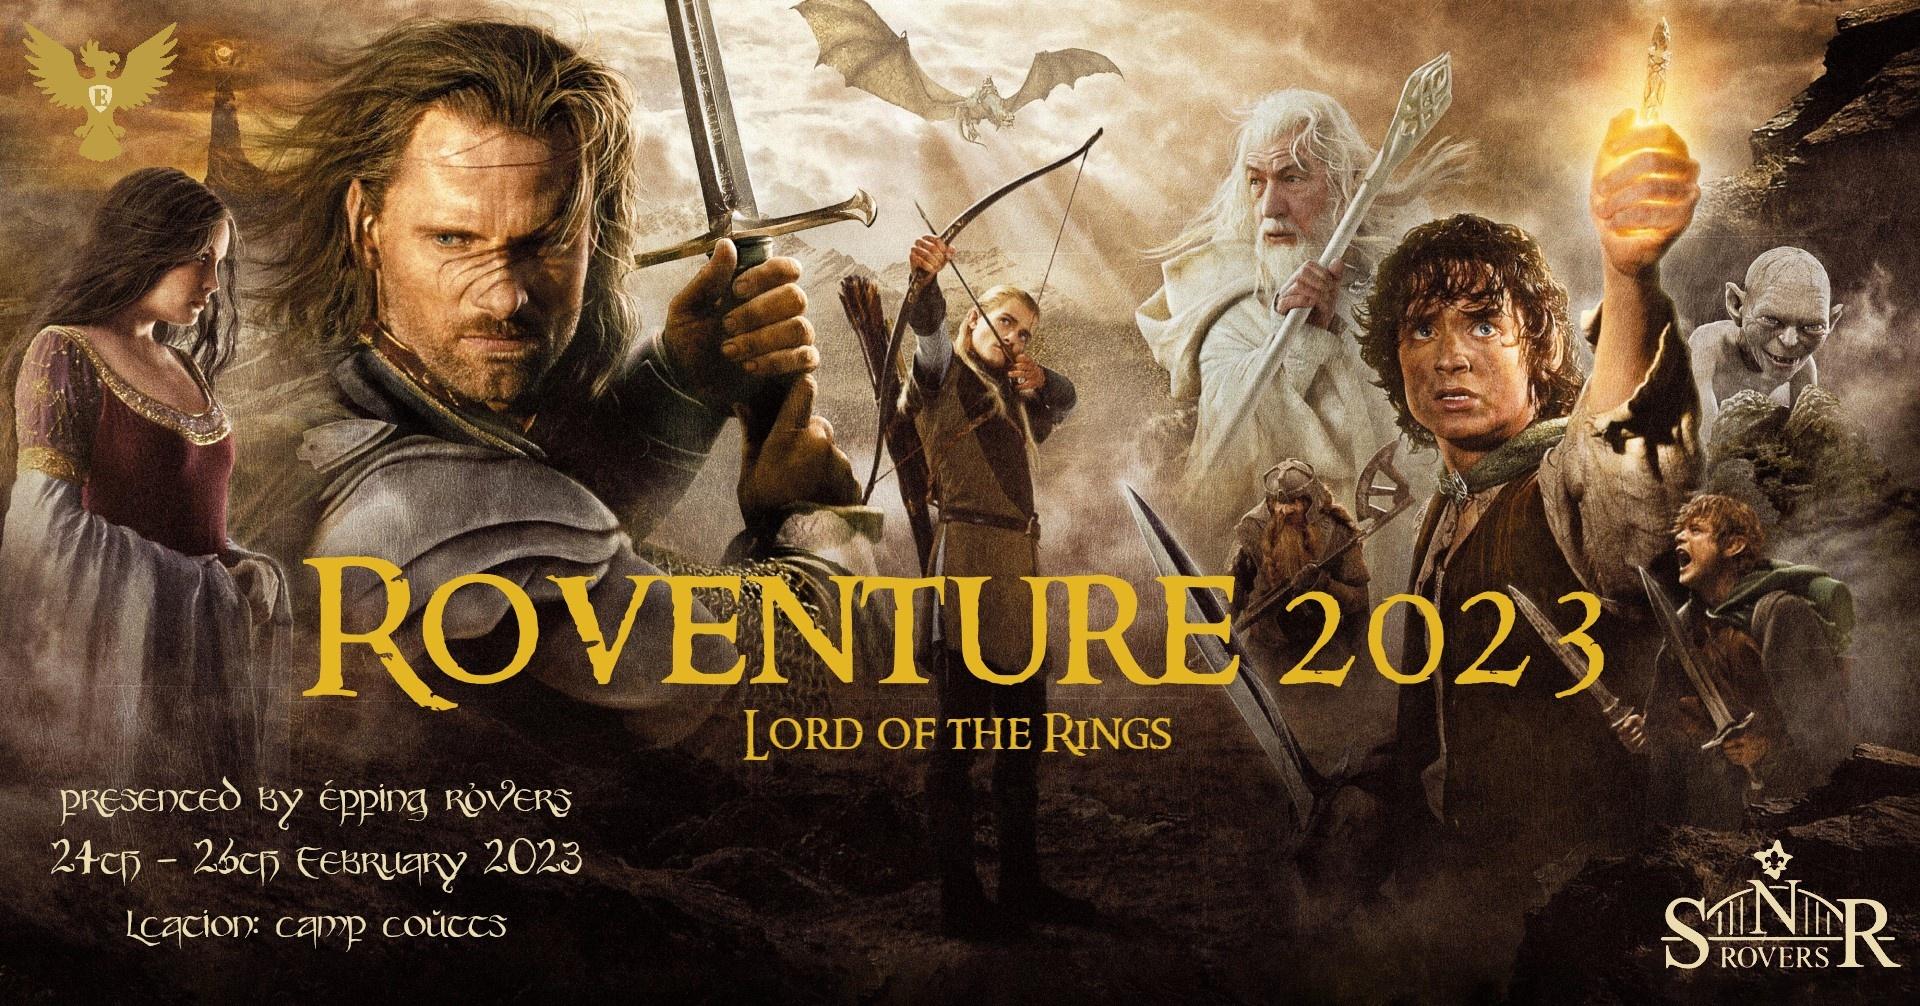 Read more about the article “Lord of the Rings” Region Roventure 2023